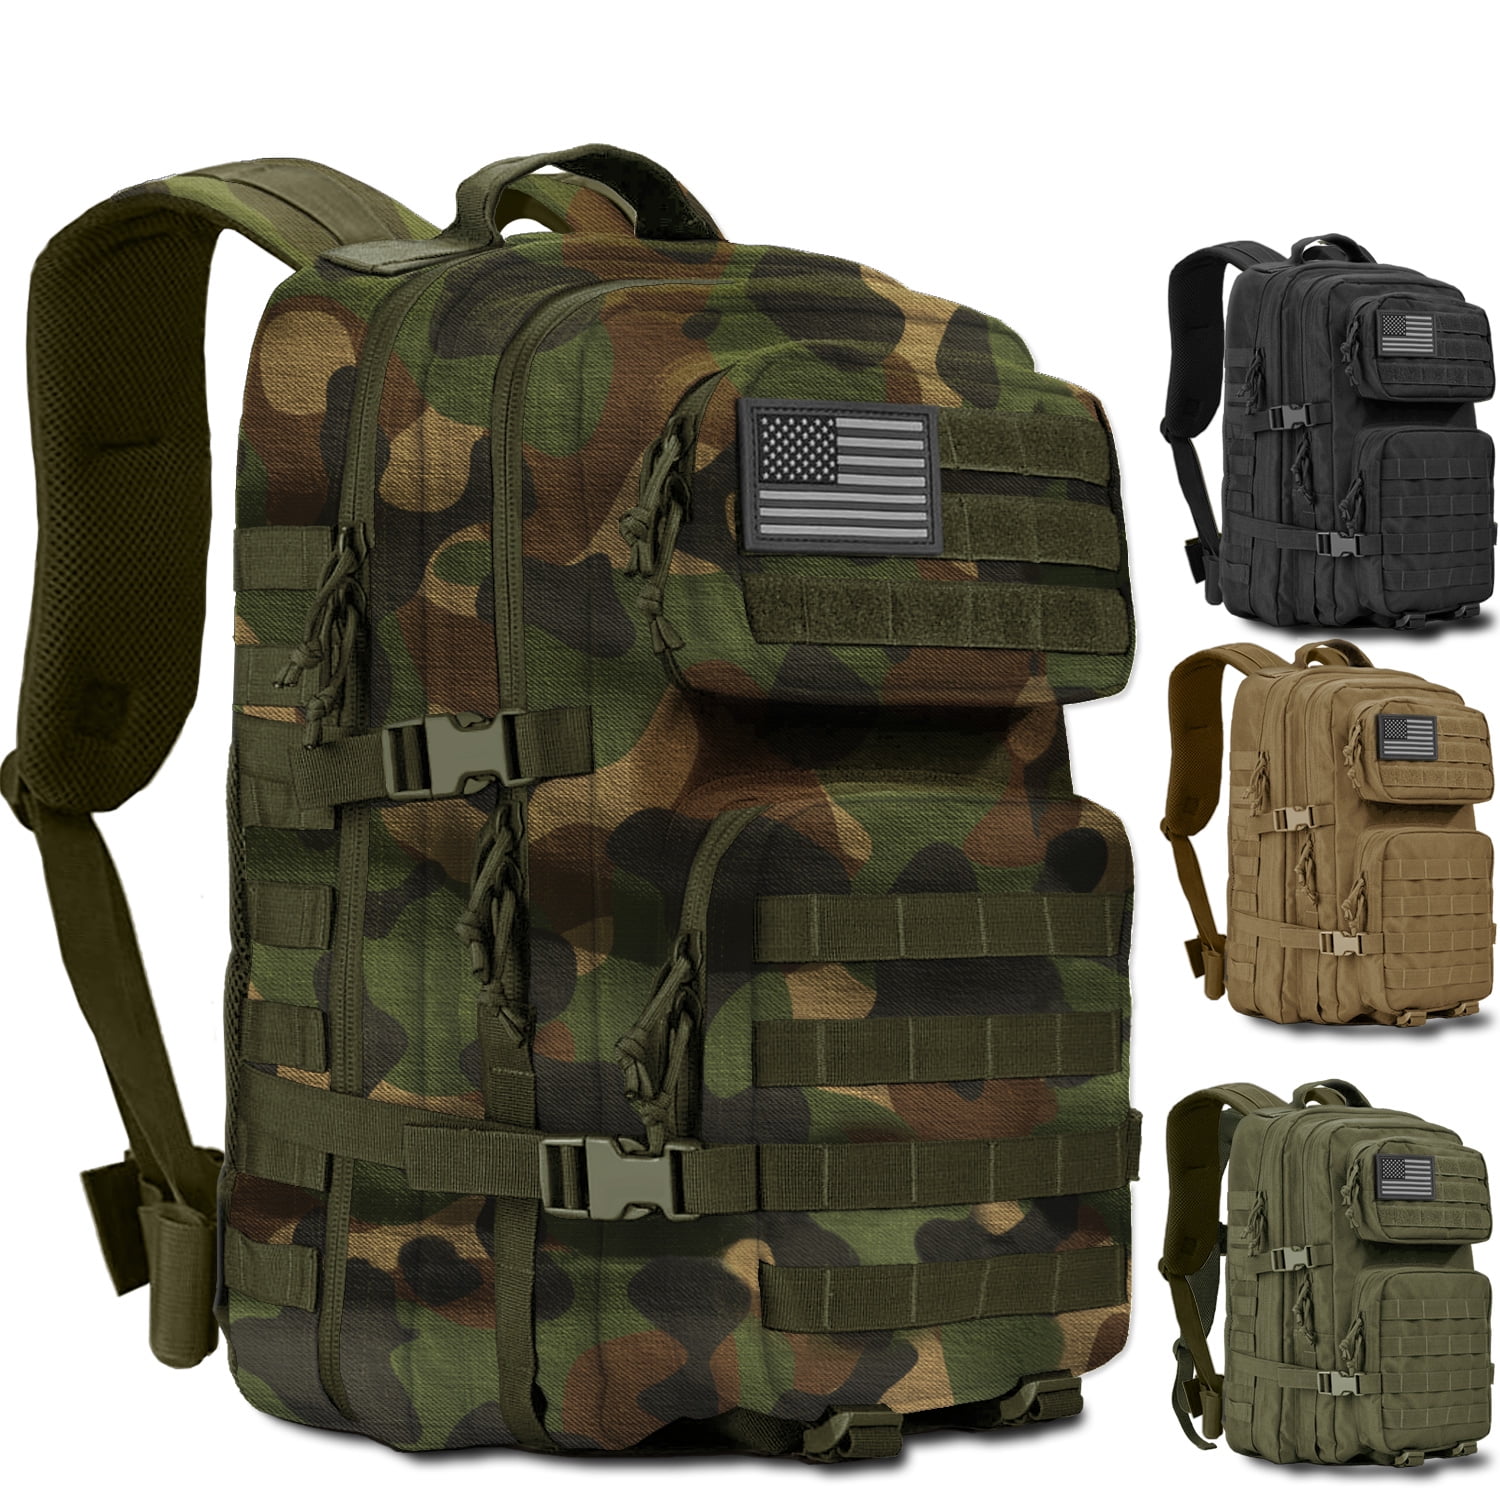  QT&QY 45L Military Tactical Backpack combat Molle Army Assault  Pack CCW 3 Day survival Bag Hiking rucking Rucksack heavy duty backpack :  Sports & Outdoors